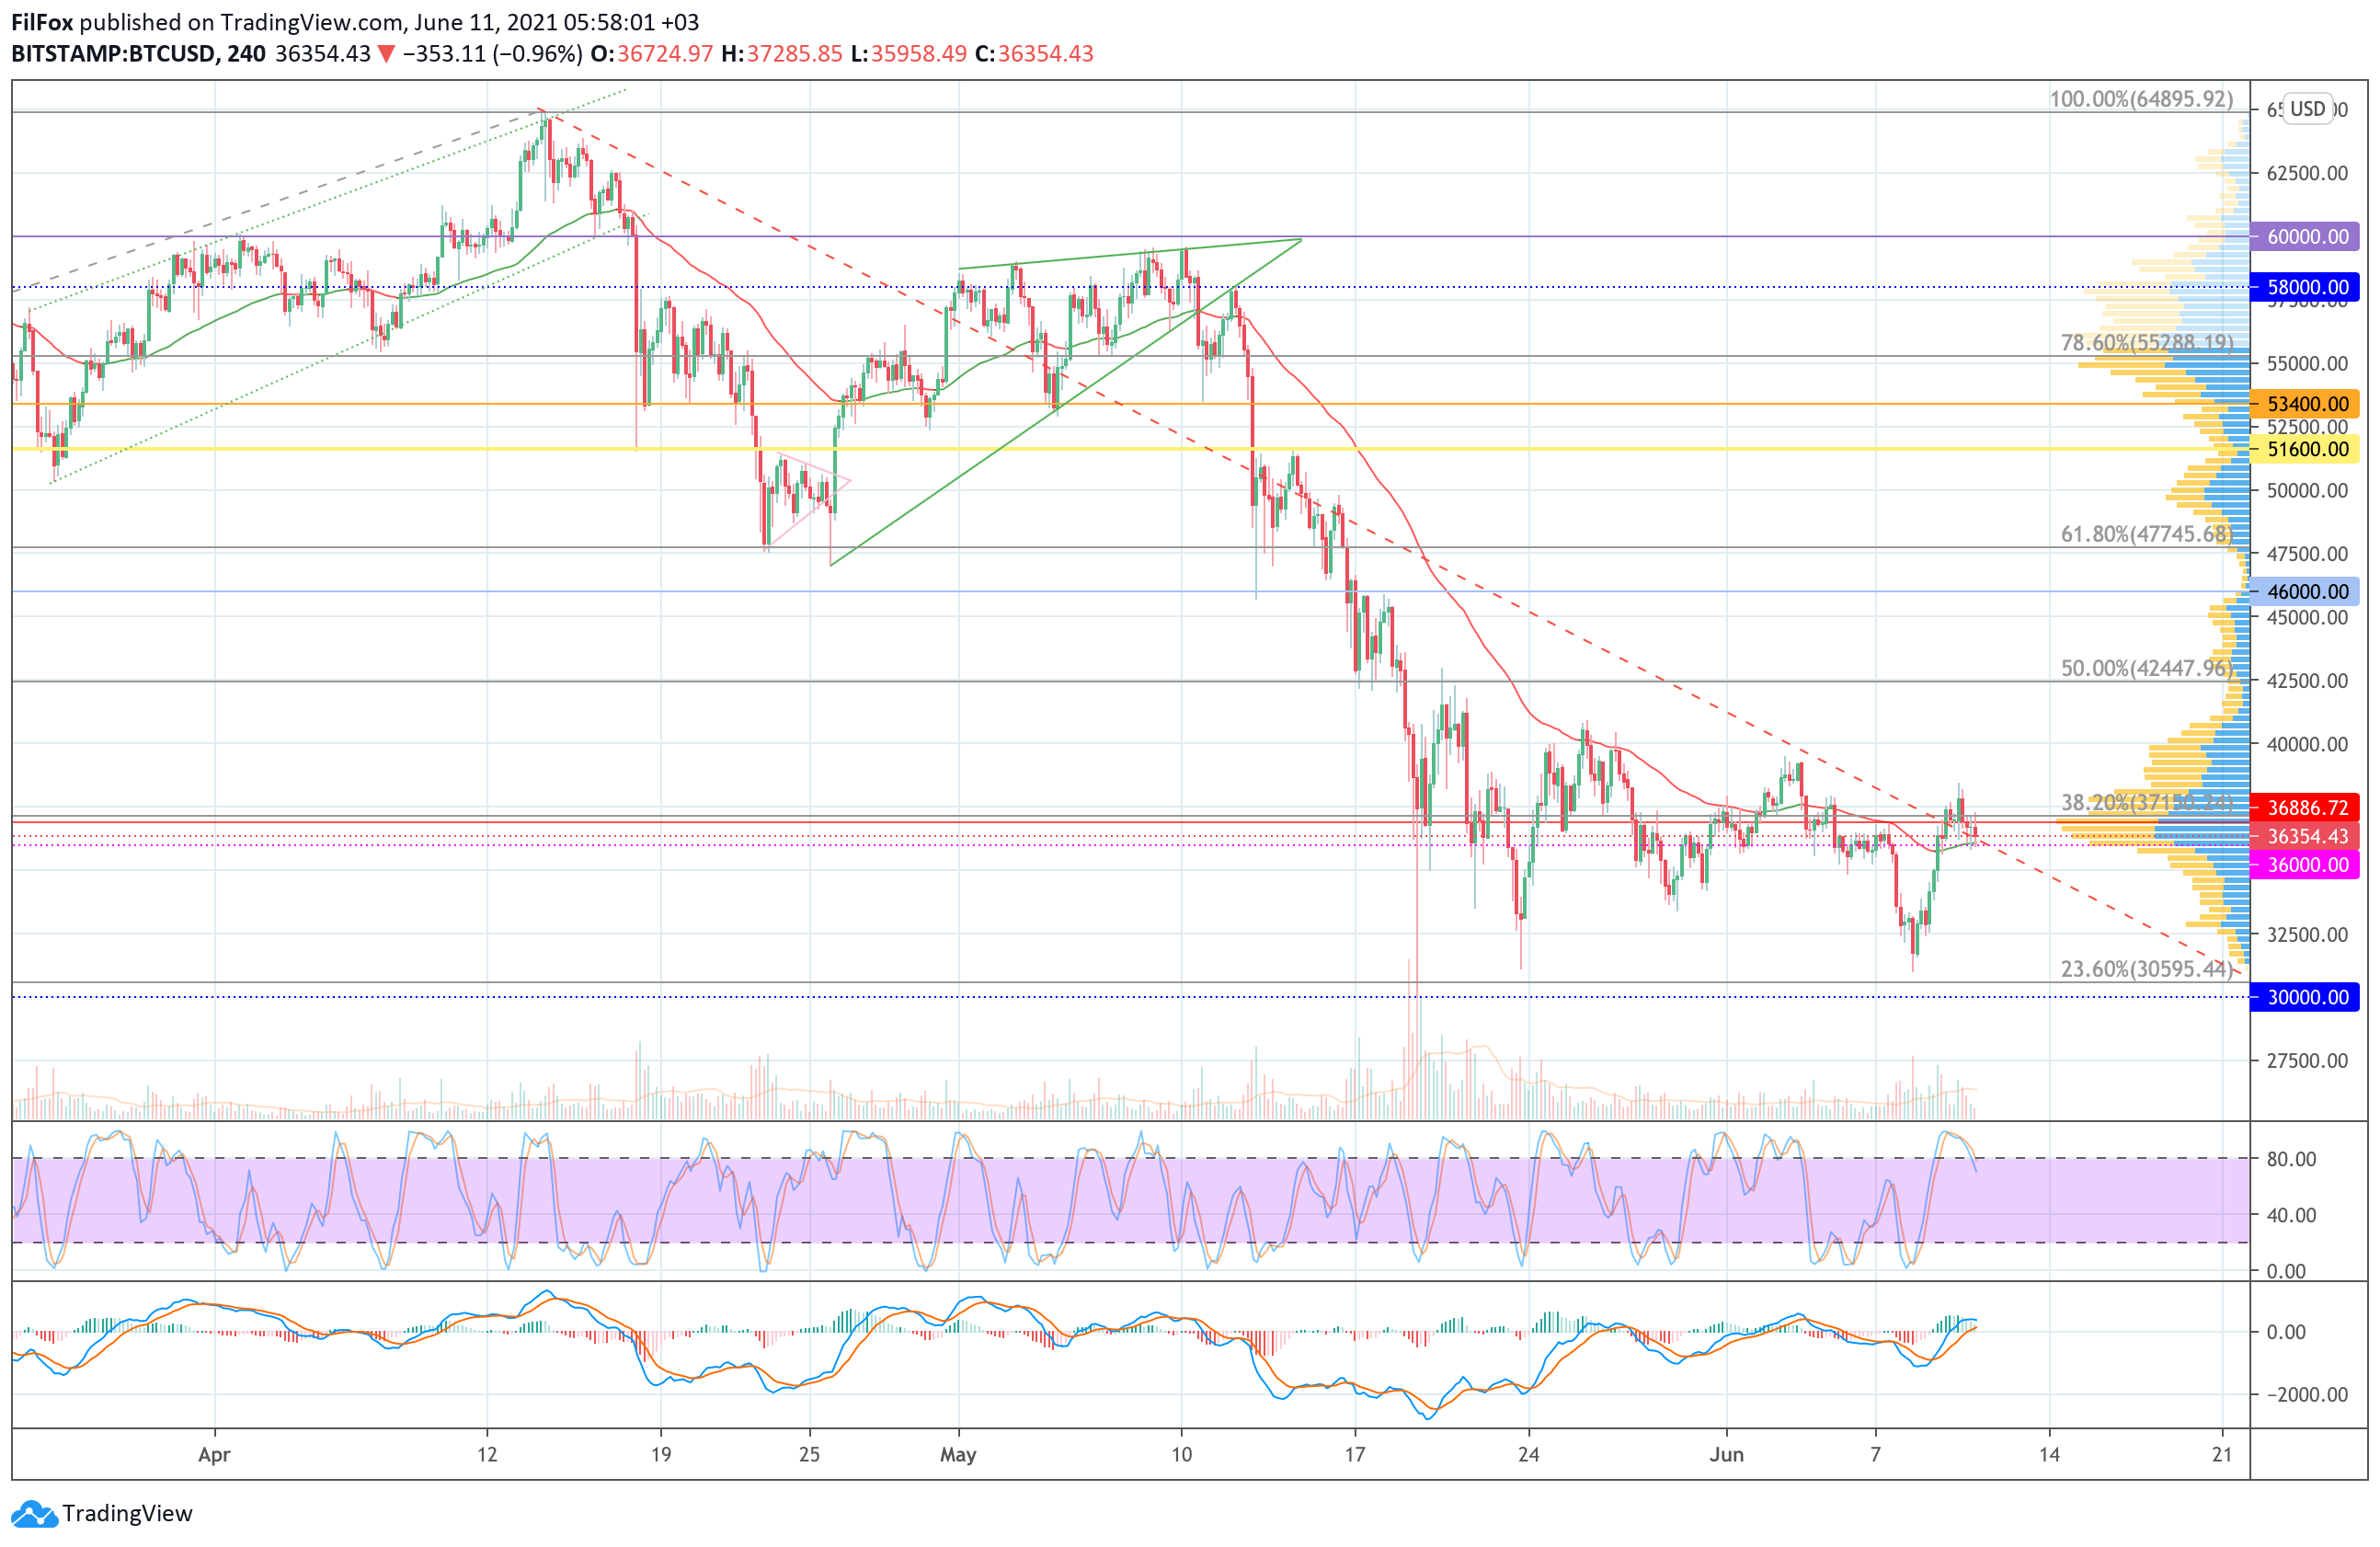 Analysis of the prices of Bitcoin, Ethereum, XRP for 06/11/2021